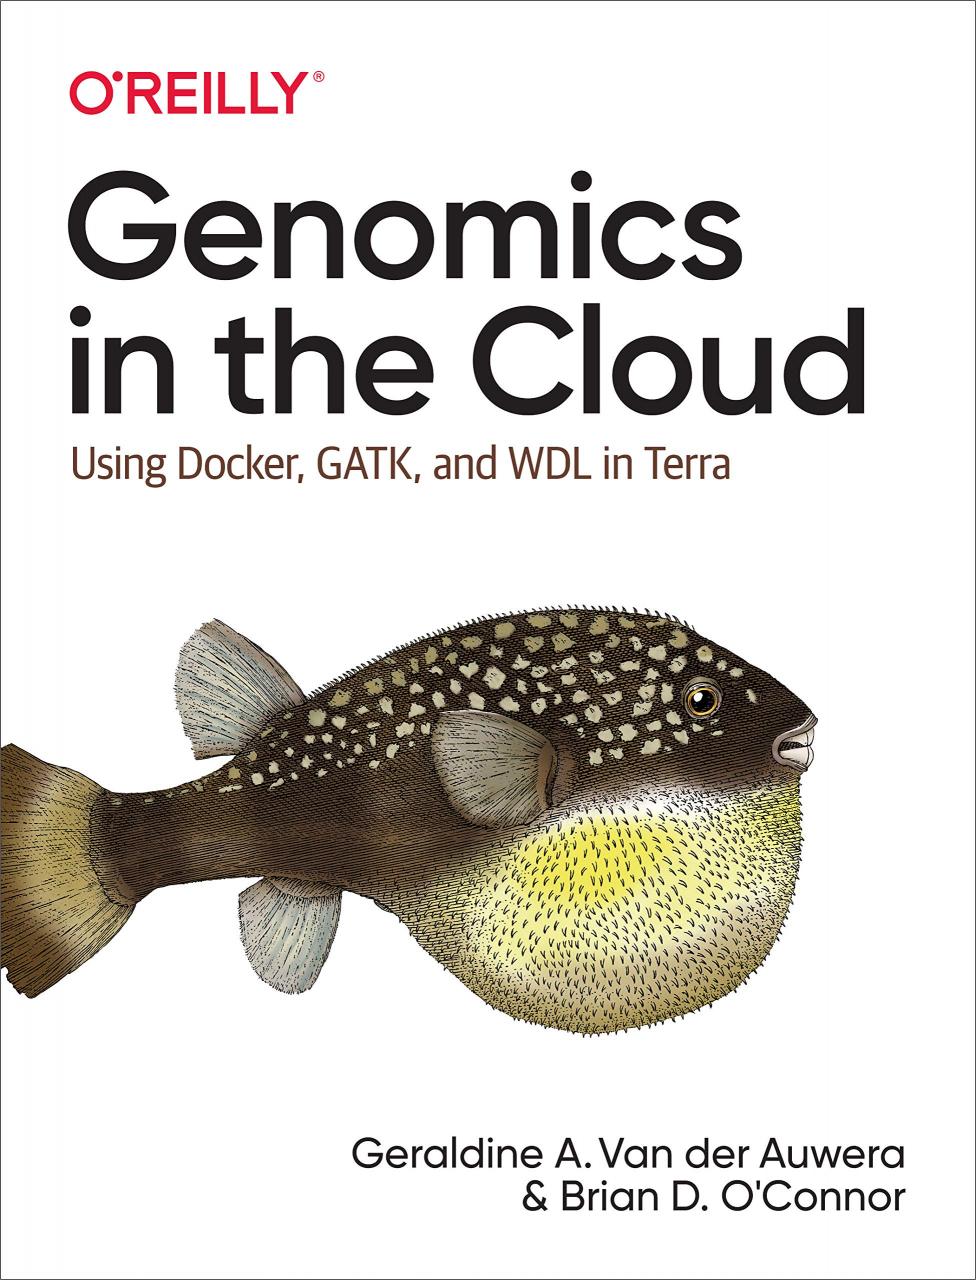 Genomics in the cloud [electronic resource]: using Docker, GATK, and WDL in Terra / Geraldine A. Van der Auwera and Brian D. O'Connor, 2020